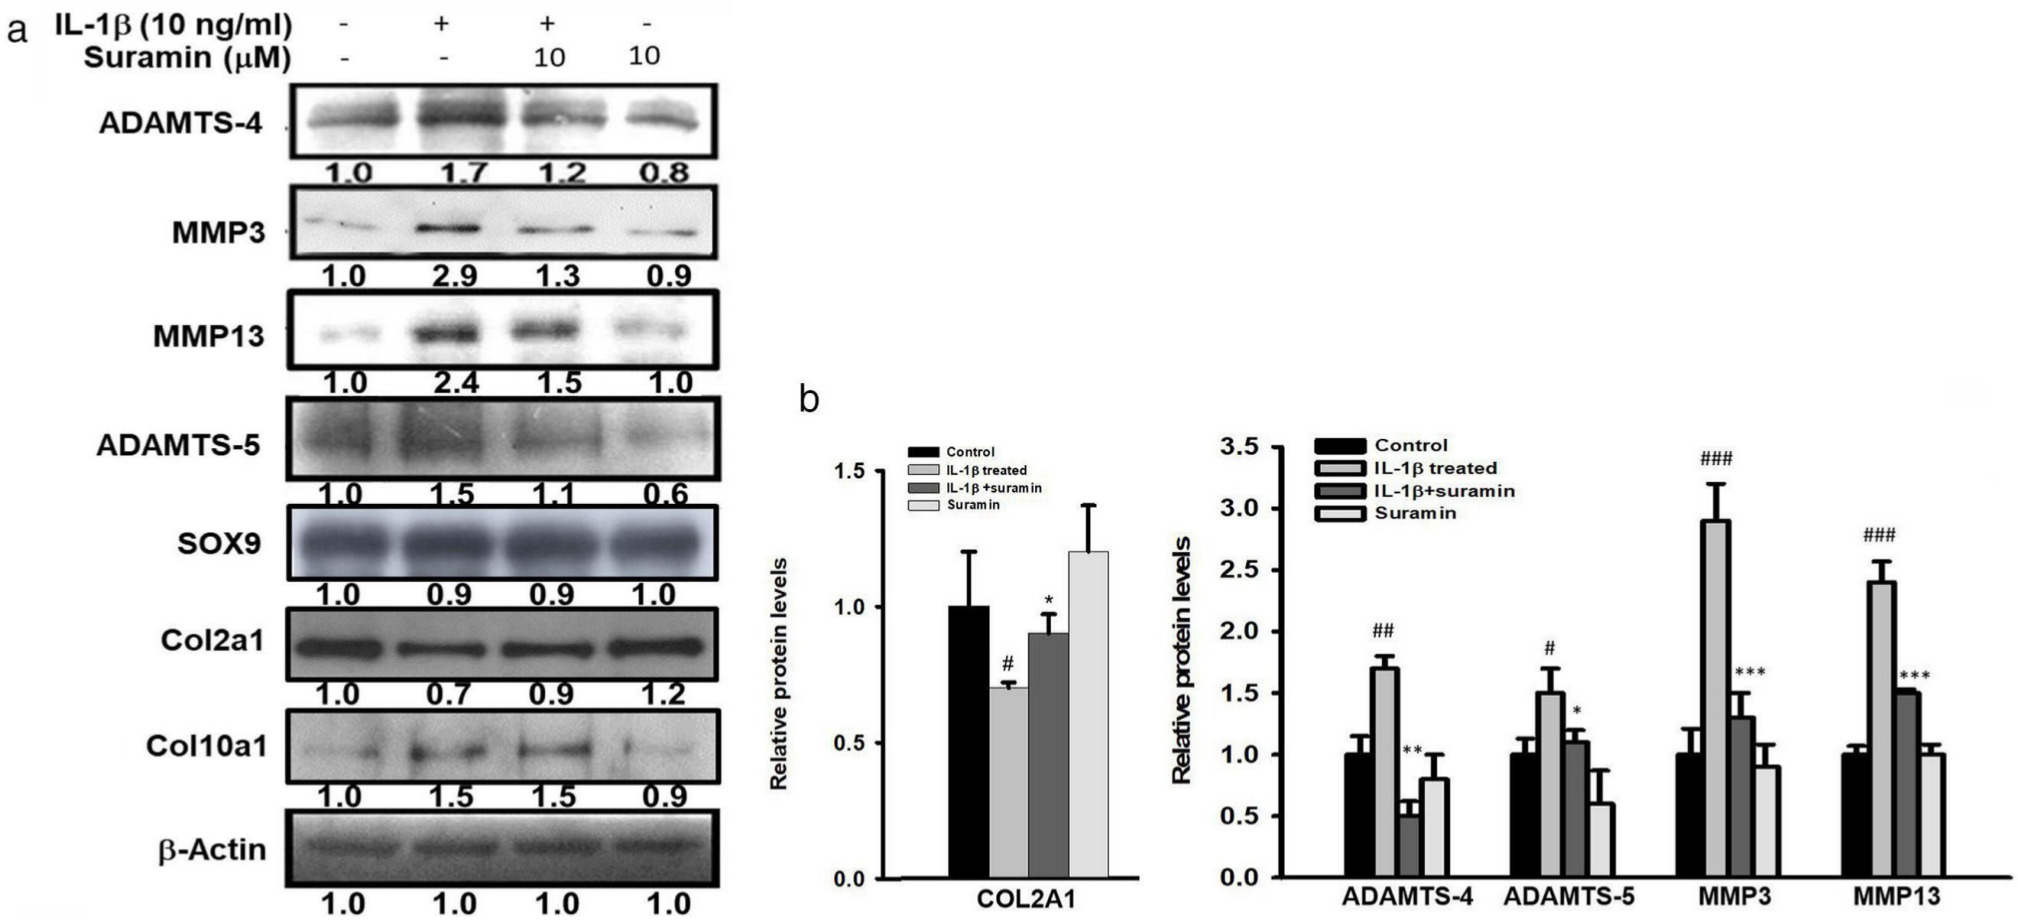 Fig. 3 
            Effect of suramin on interleukin (IL)-1β-induced anabolic and catabolic factors expression in nucleus pulposus (NP) cells. a) Western blotting of protein levels of matrix metalloproteinase (MMP)-3, MMP-13, a disintegrin and metalloproteinase with thrombospondin motifs (ADAMTS)-4, and ADAMTS-5 in NP cells treated with suramin combined with or without interleukin (IL)-1β (10 ng/ml) for 24 hours (n = 3 to 5). b) Semi-quantitative analysis of the protein levels of collagen 2A (COL2A1), ADAMTS-4, ADAMTS-5, MMP-3, and MMP-13. #p < 0.05, ##p < 0.01, ###p < 0.001 versus control group; *p < 0.05, **p < 0.01, ***p < 0.001 versus IL-1β group. SOX9, SRY-Box Transcription Factor 9.
          